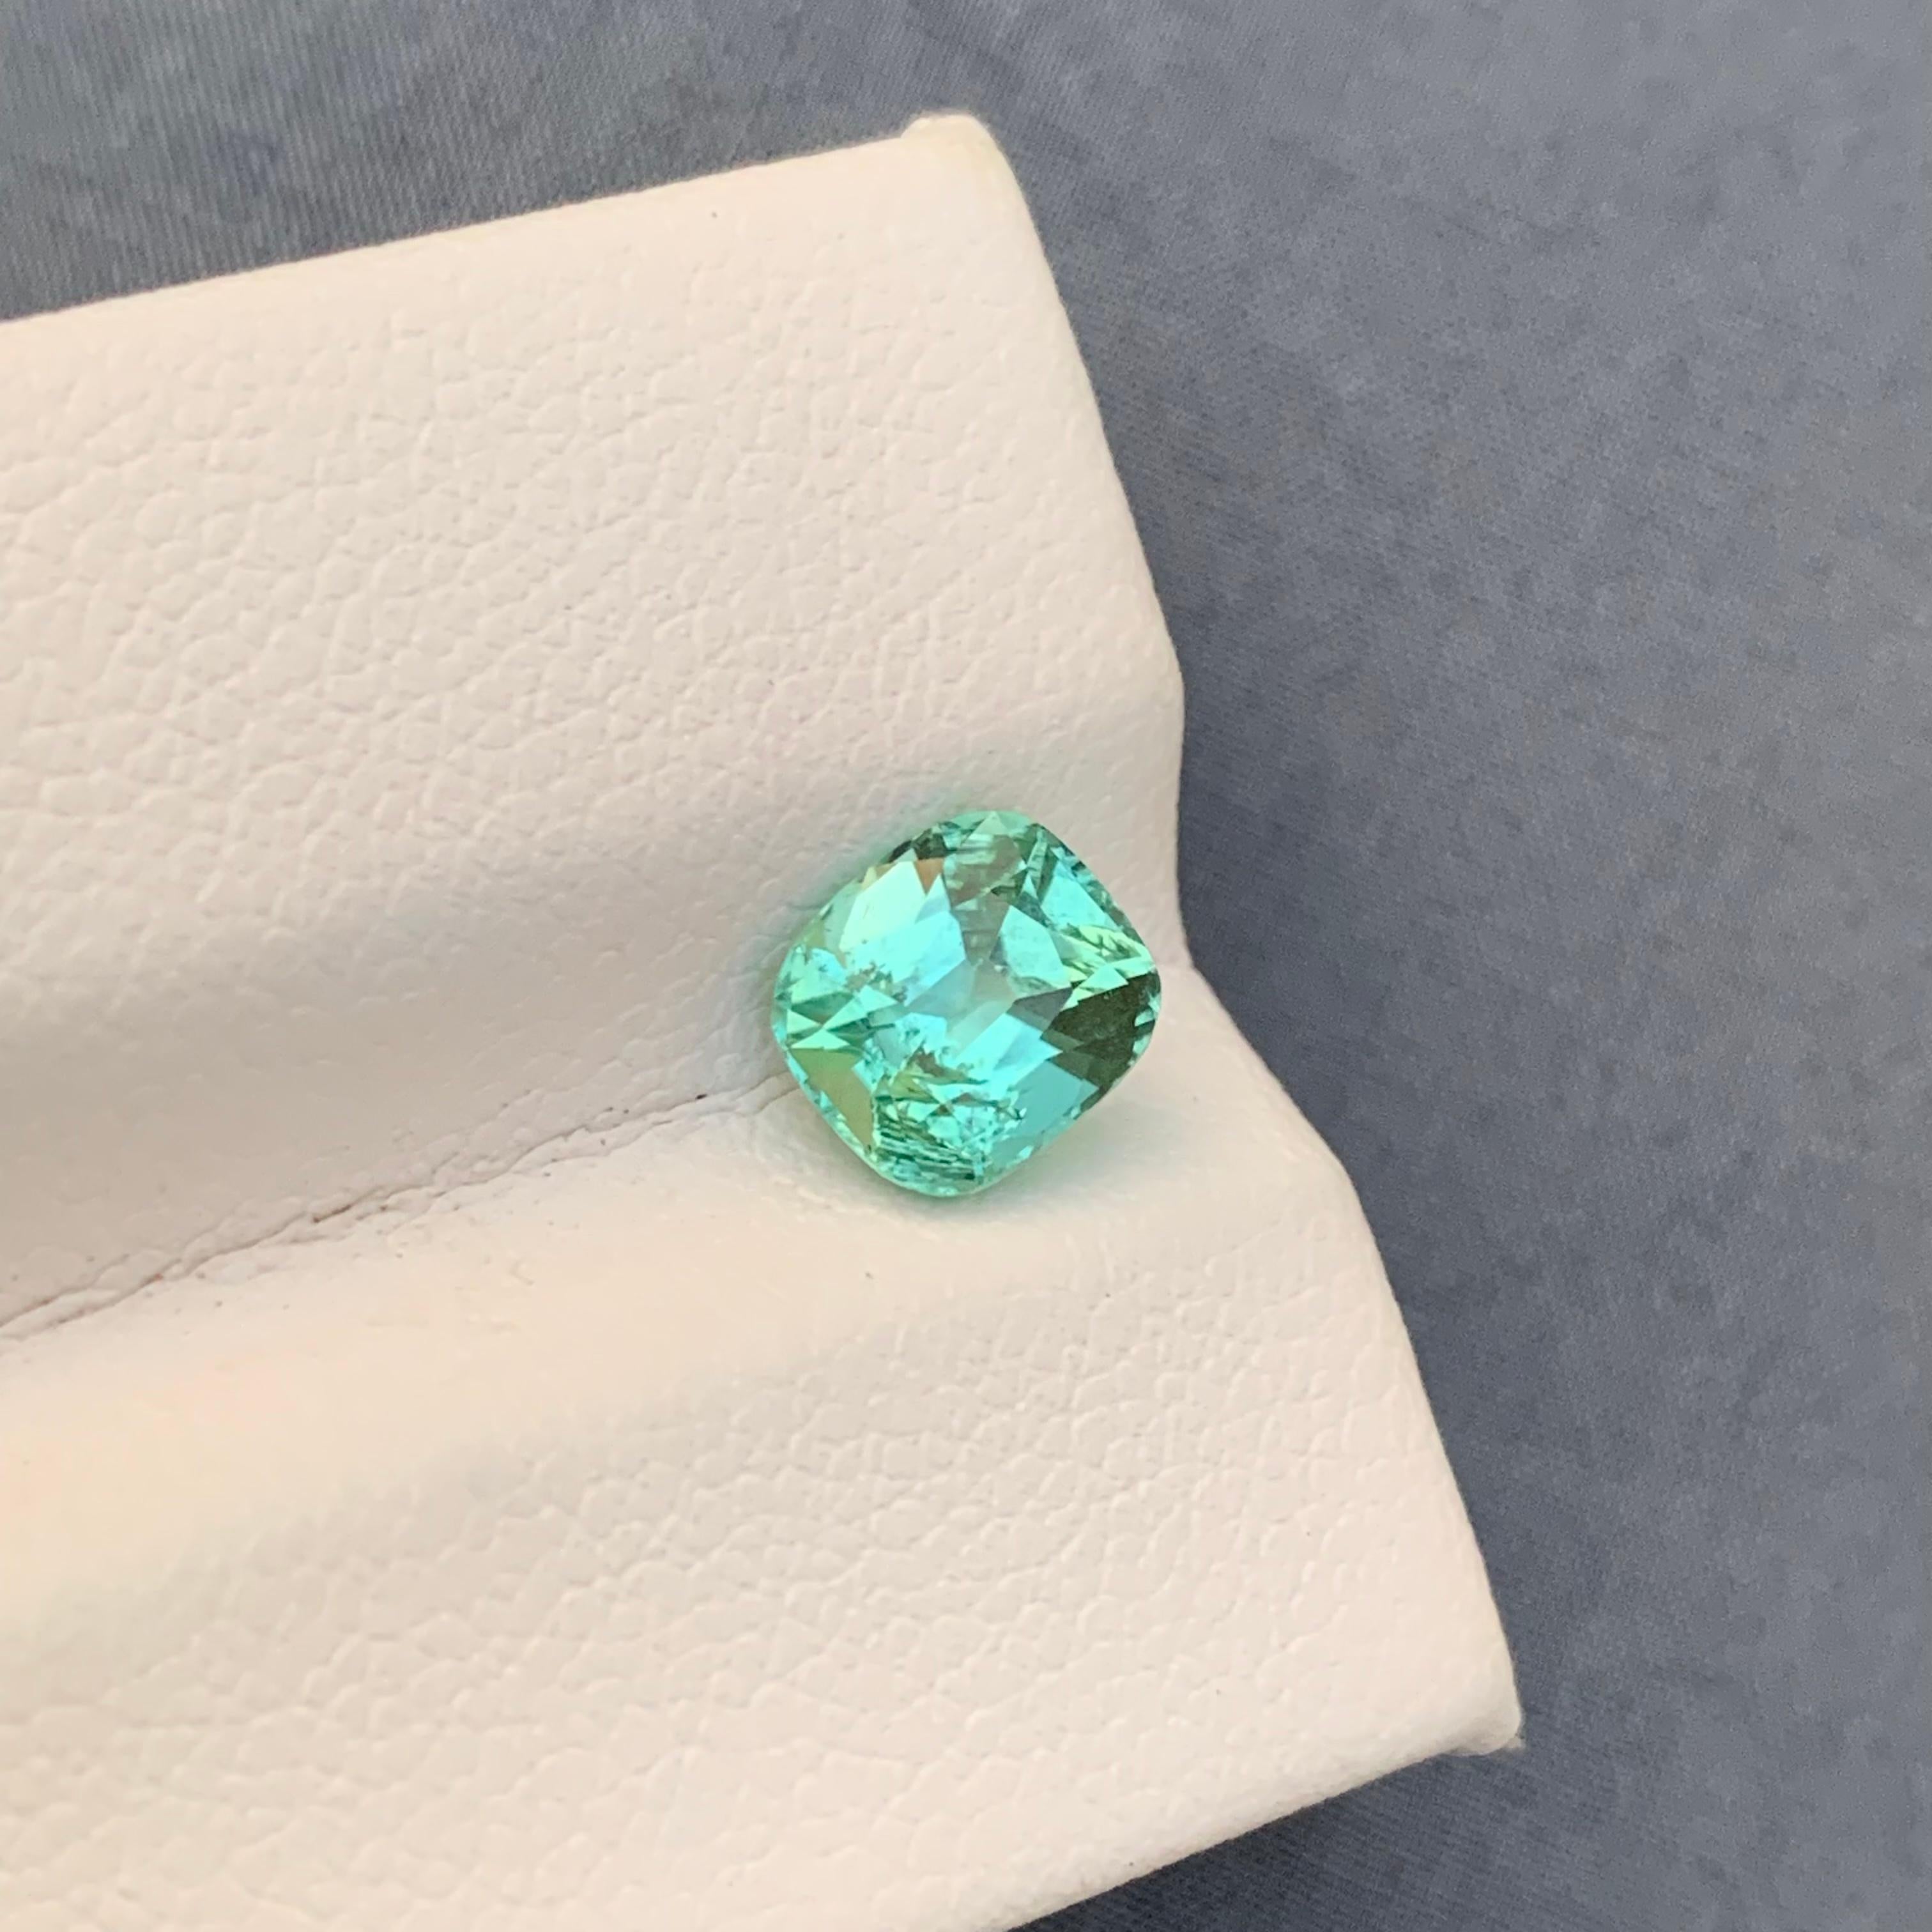 Women's or Men's 1.50 Carats Faceted Mintgreen Tourmaline Cushion Cut Gemstone Afghan Mine For Sale